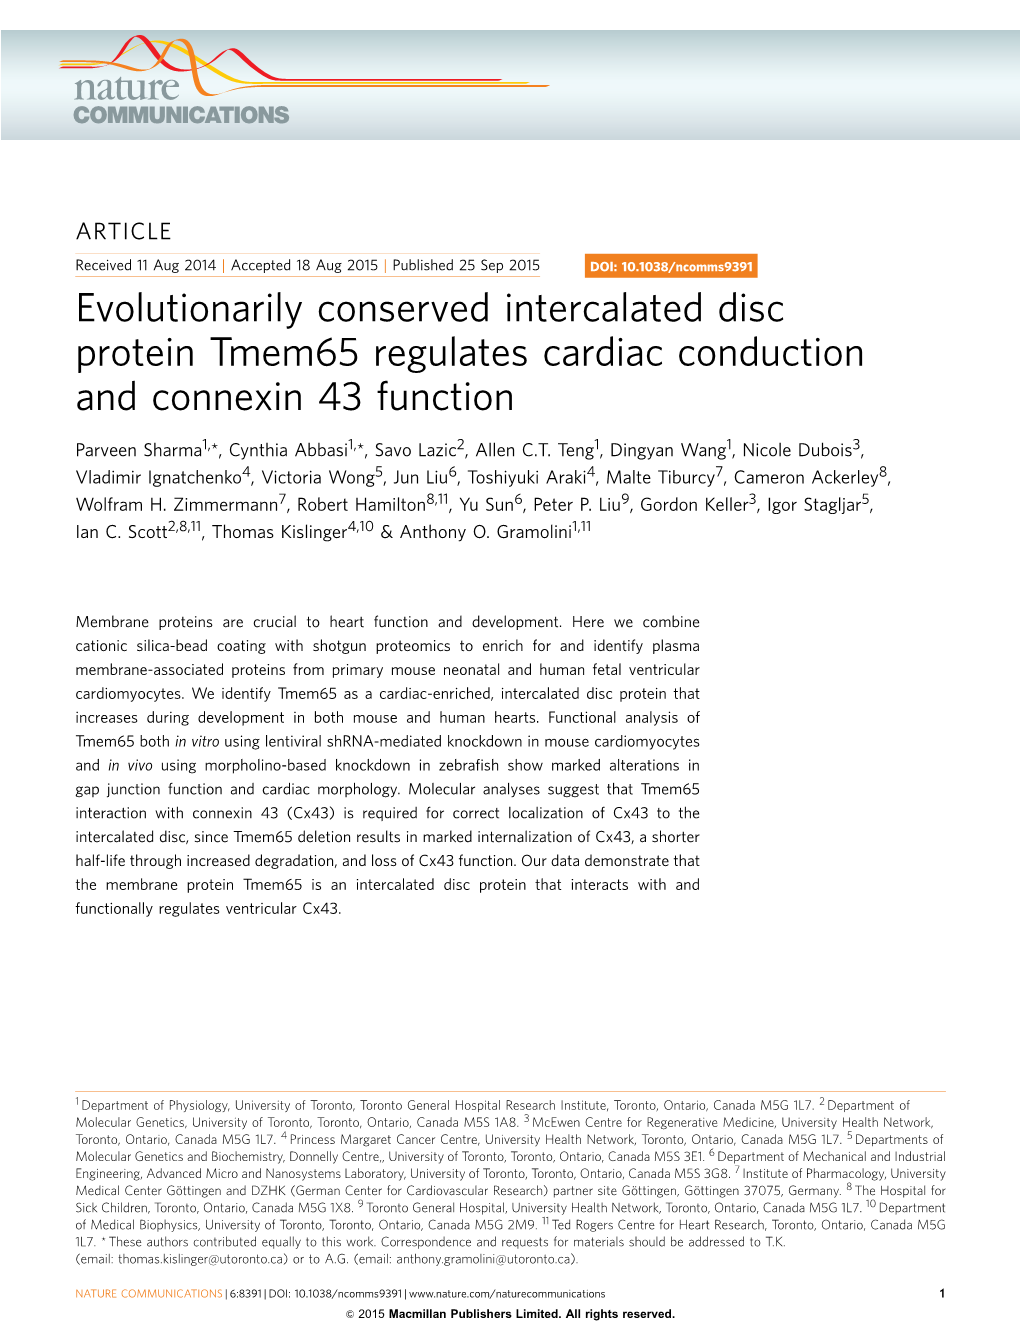 Evolutionarily Conserved Intercalated Disc Protein Tmem65 Regulates Cardiac Conduction and Connexin 43 Function